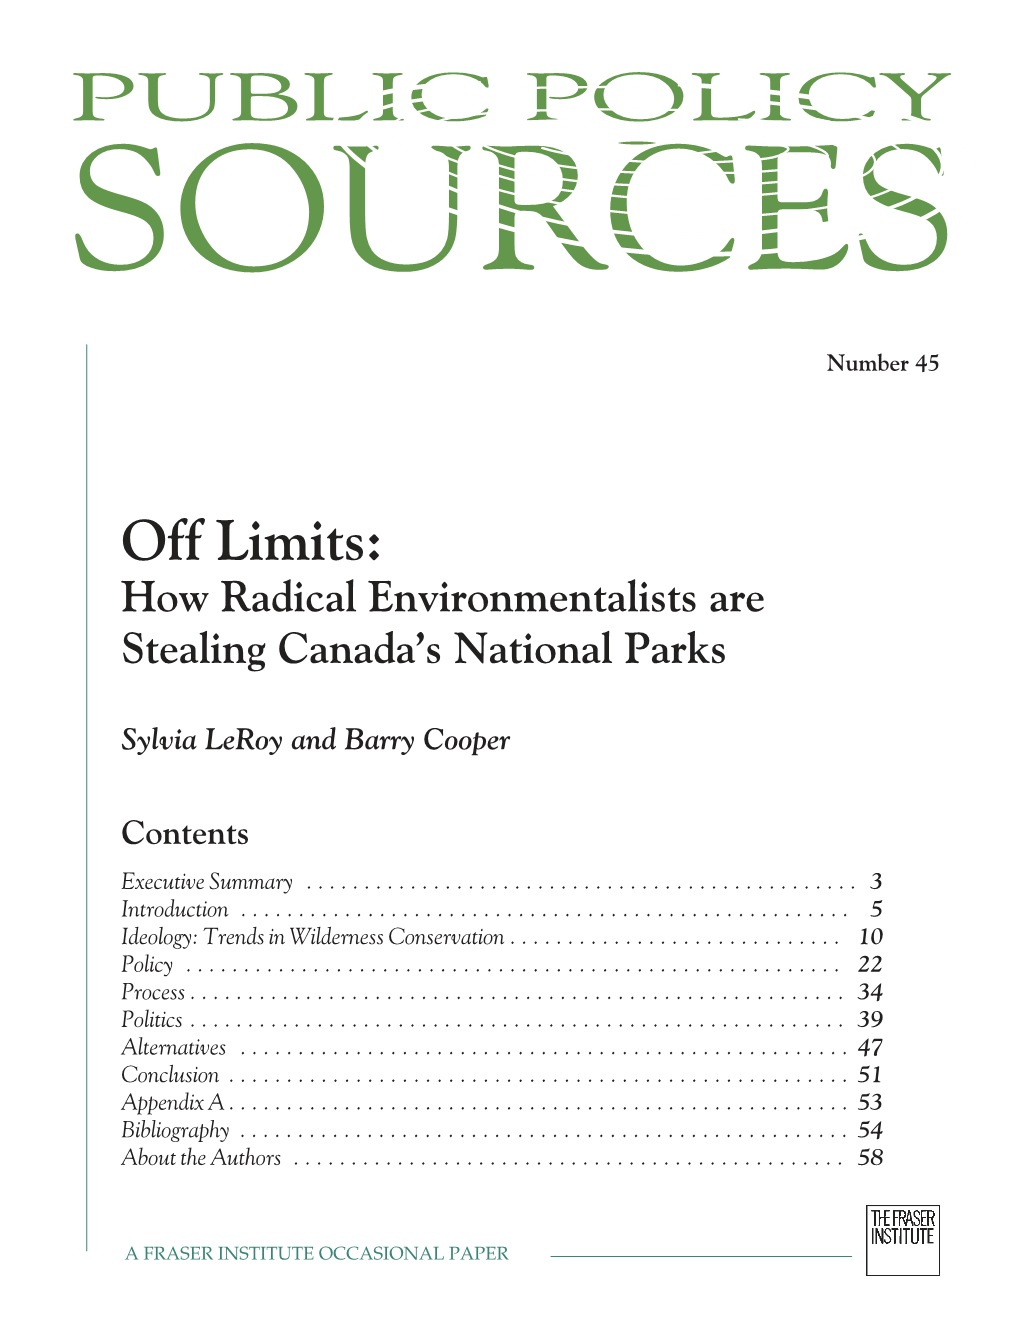 Off Limits: How Radical Environmentalists Are Stealing Canada’S National Parks